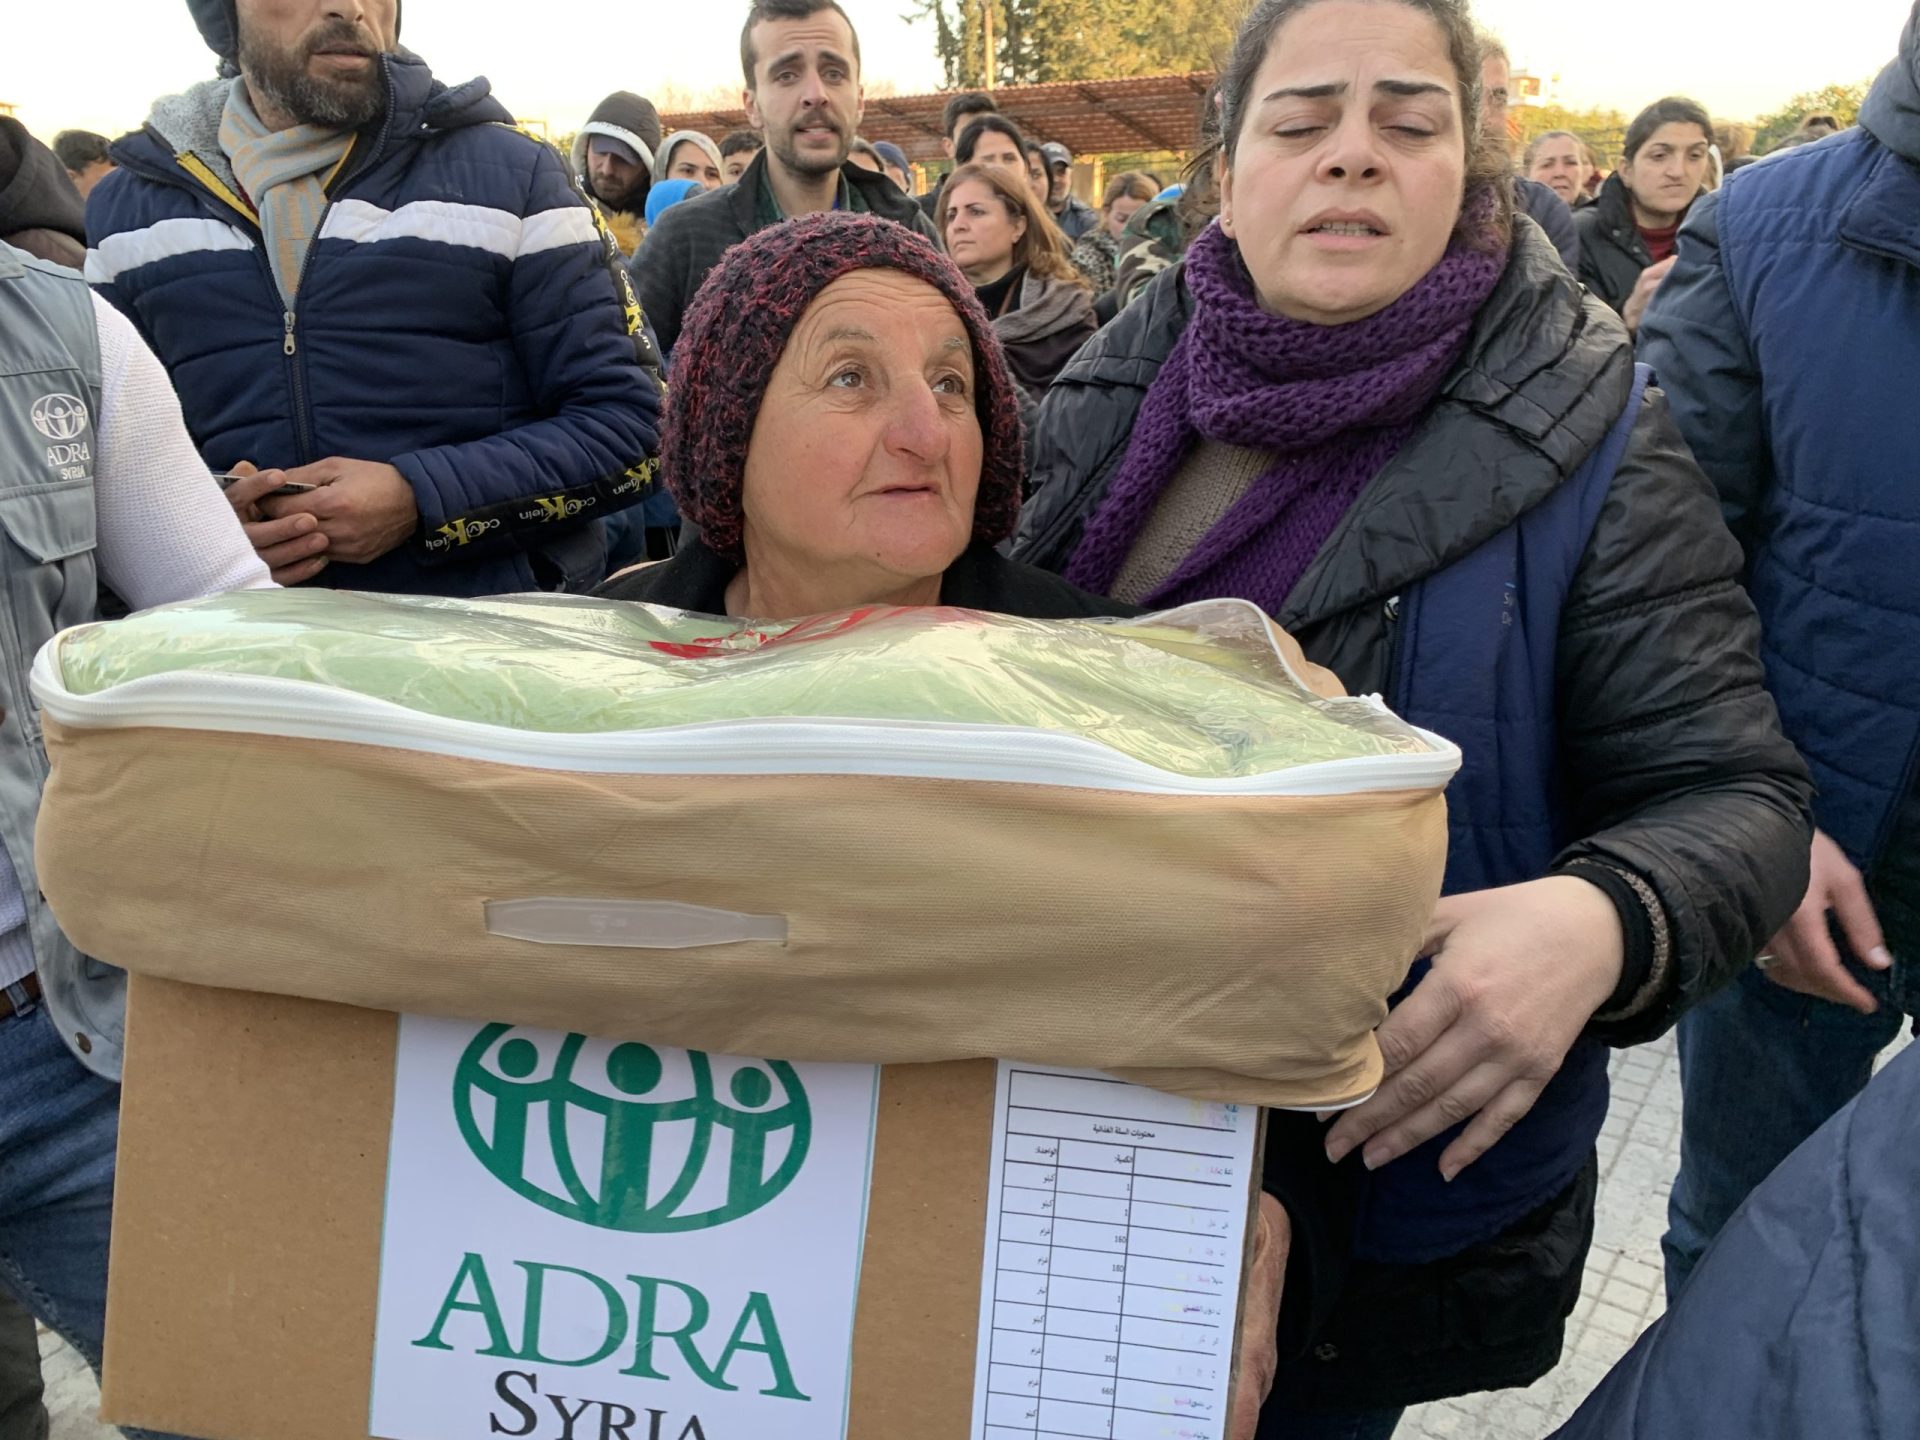 ADRA handing out food packs in Syria following the earthquake